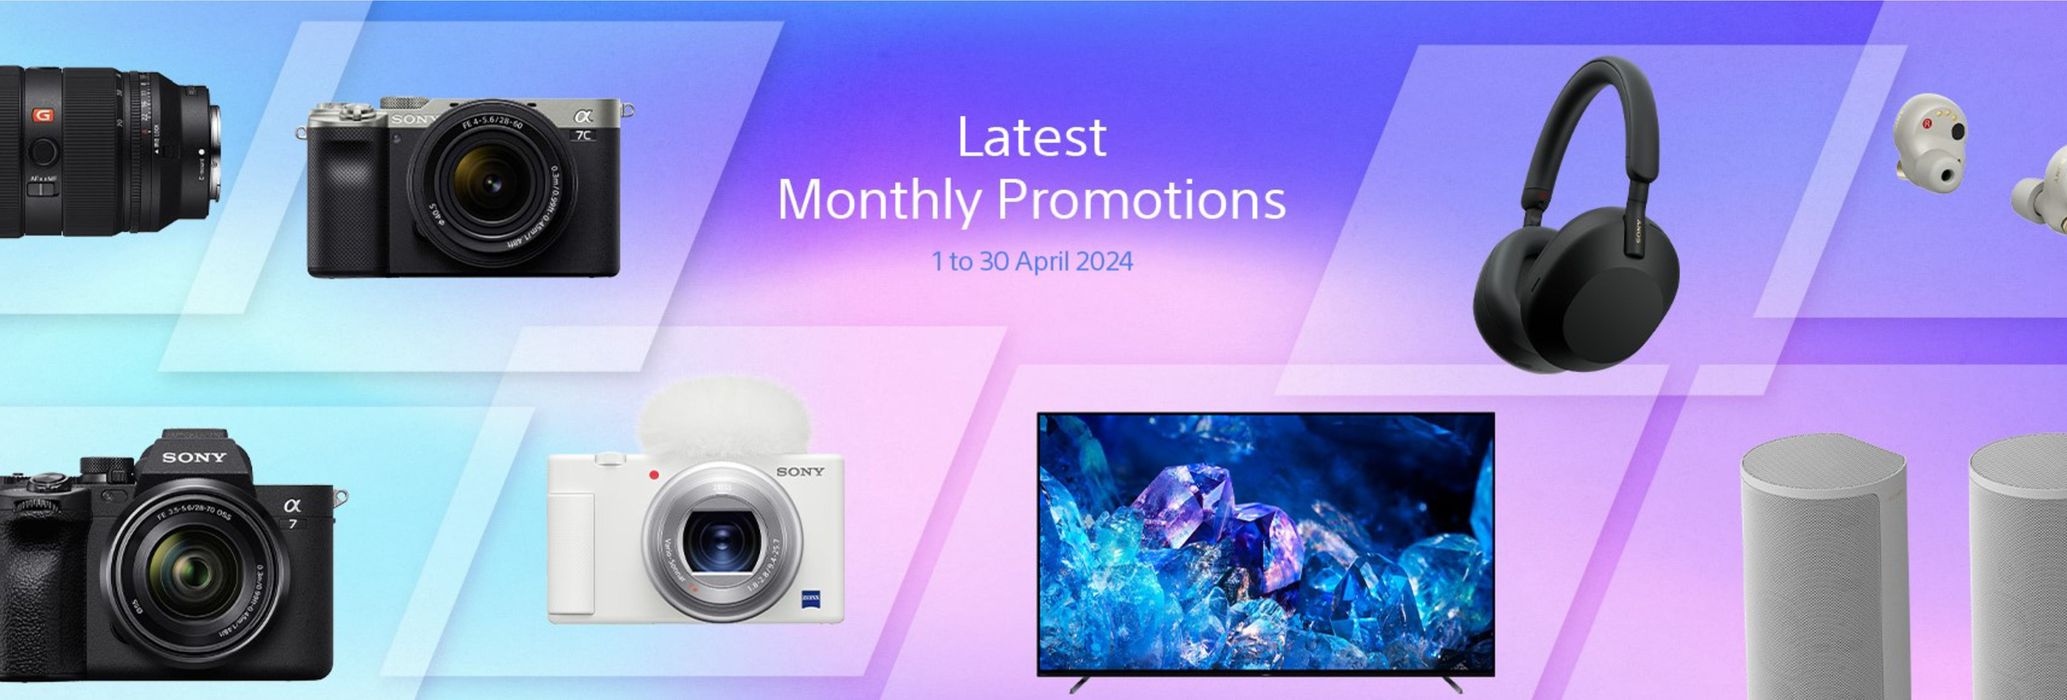 Sony catalogue | Latest monthly promotion | 09/04/2024 - 30/04/2024